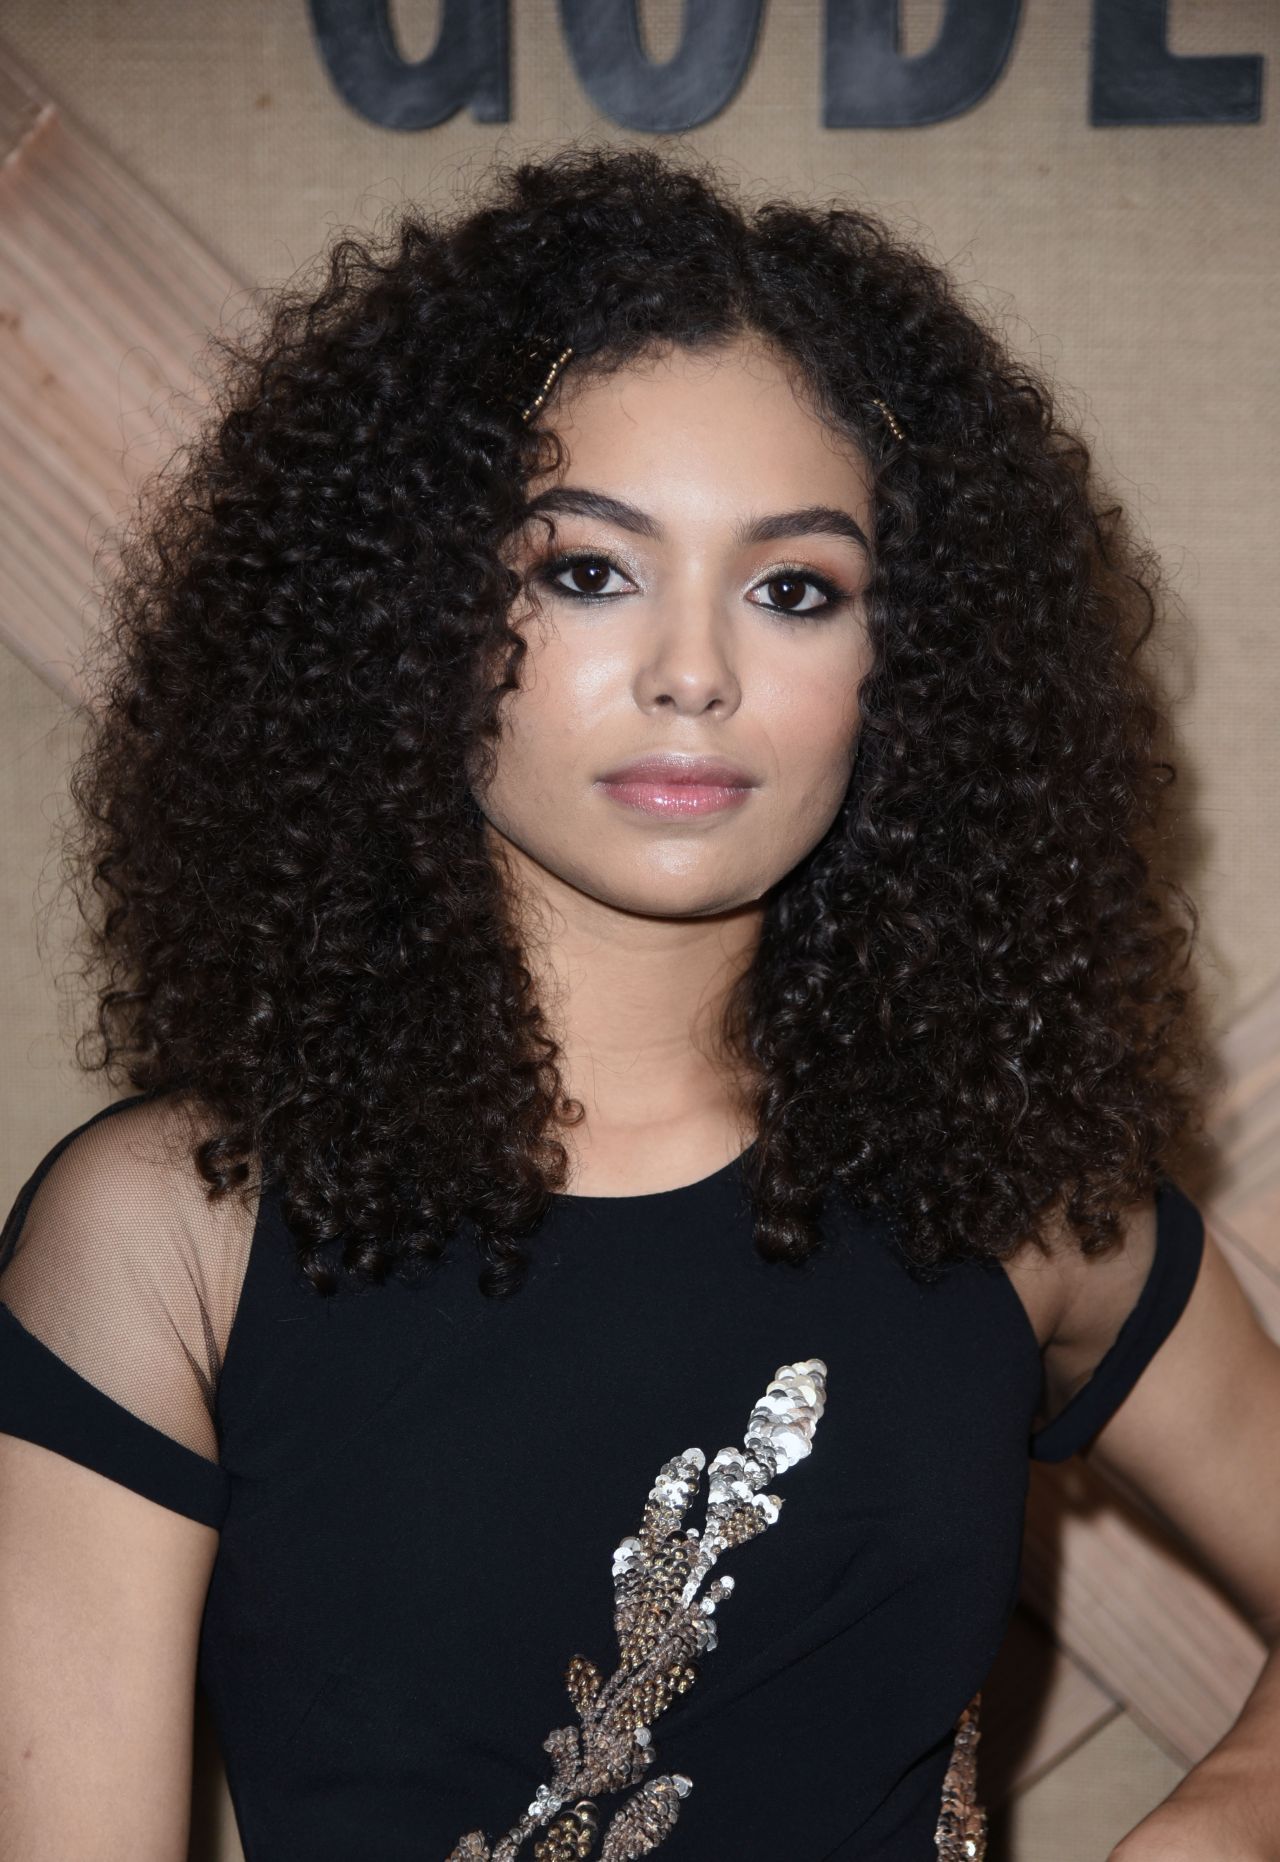 How tall is Jessica Sula?